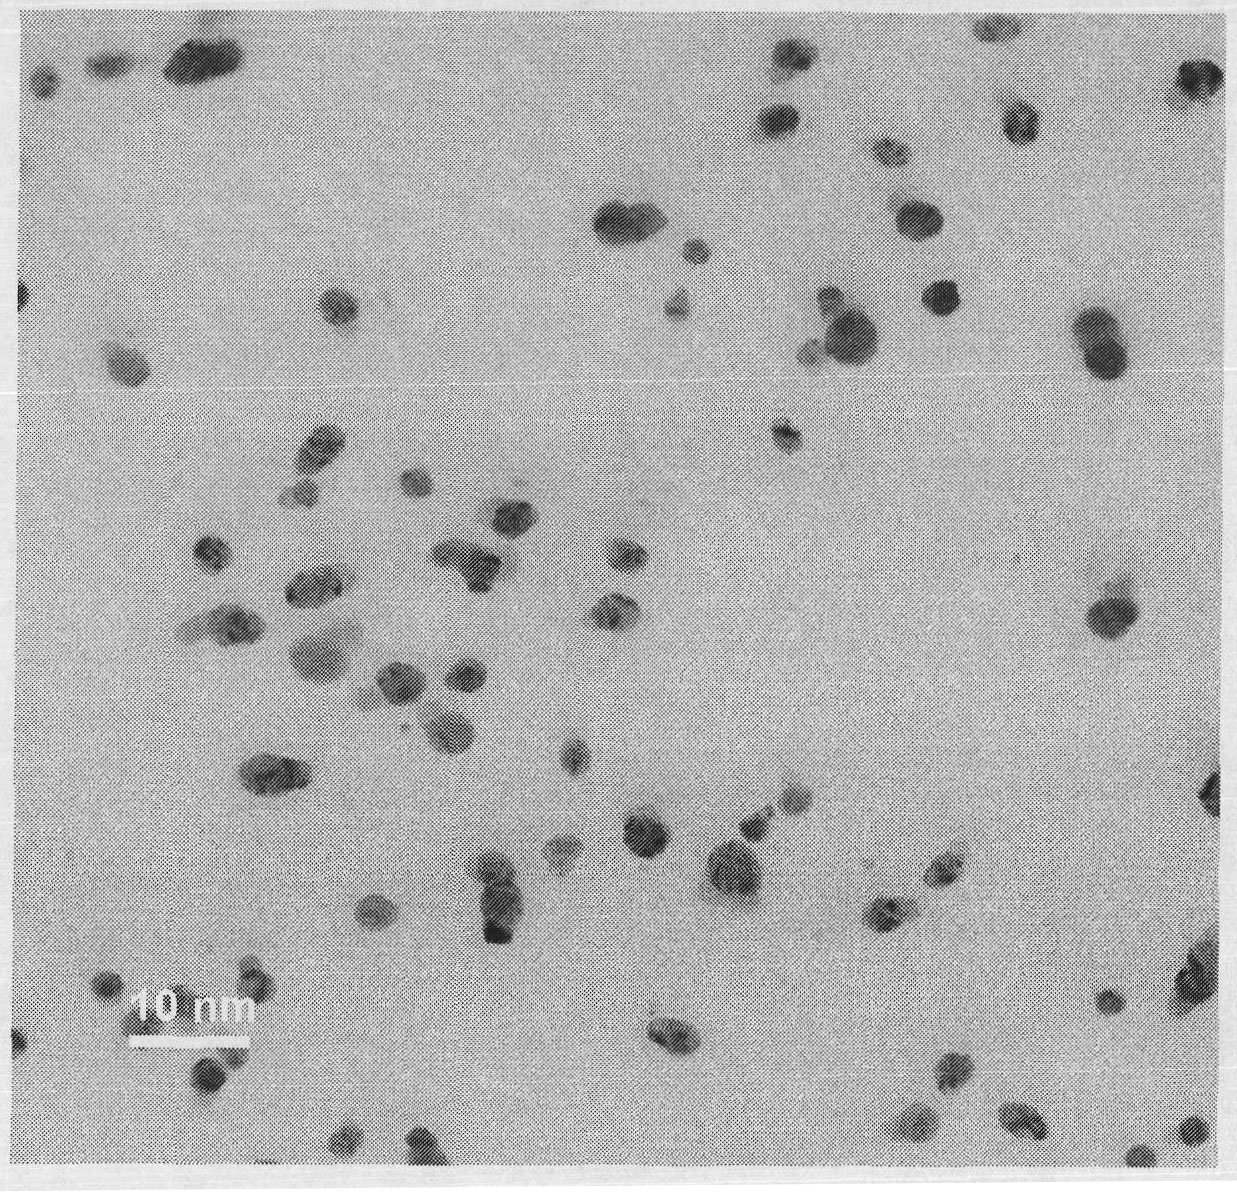 Preparation method of water-soluble silver halide nanoparticle